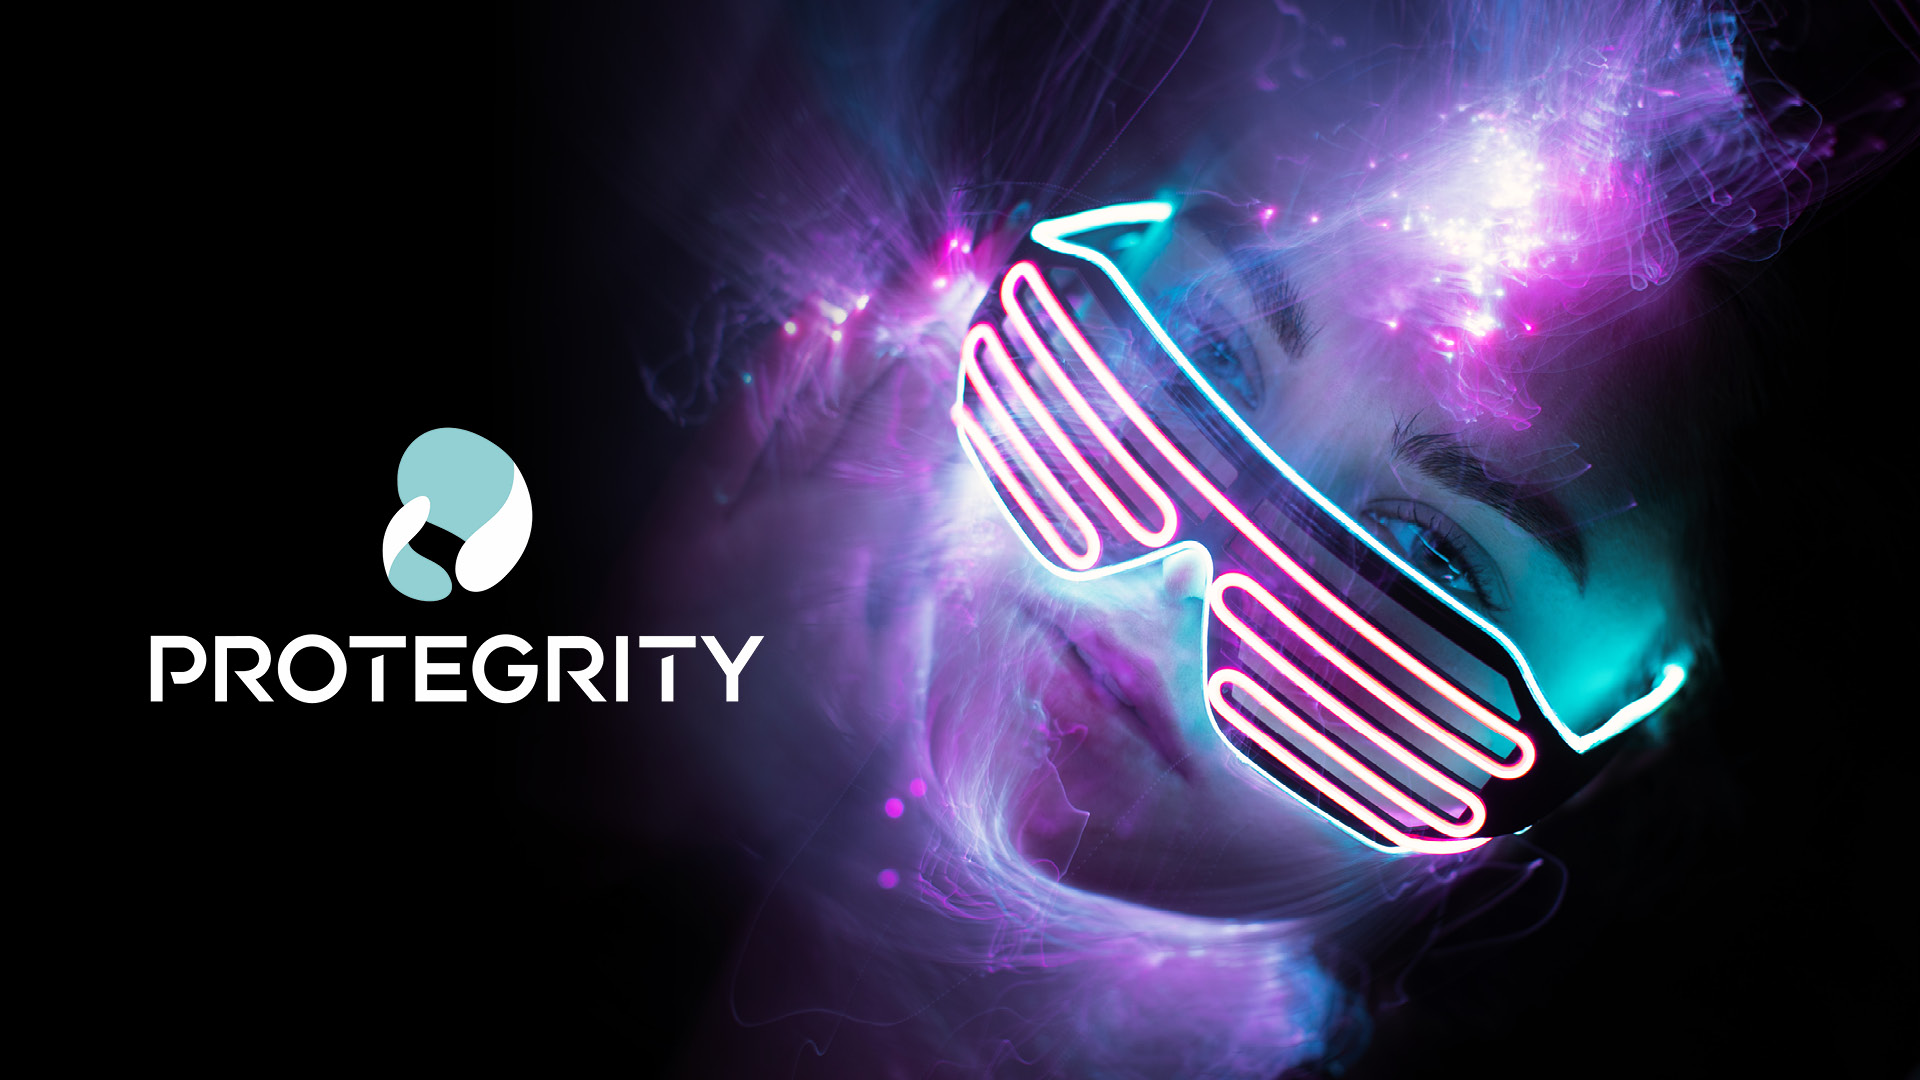 Discai partners with Protegrity, the standard in data protection for secure AI-based software